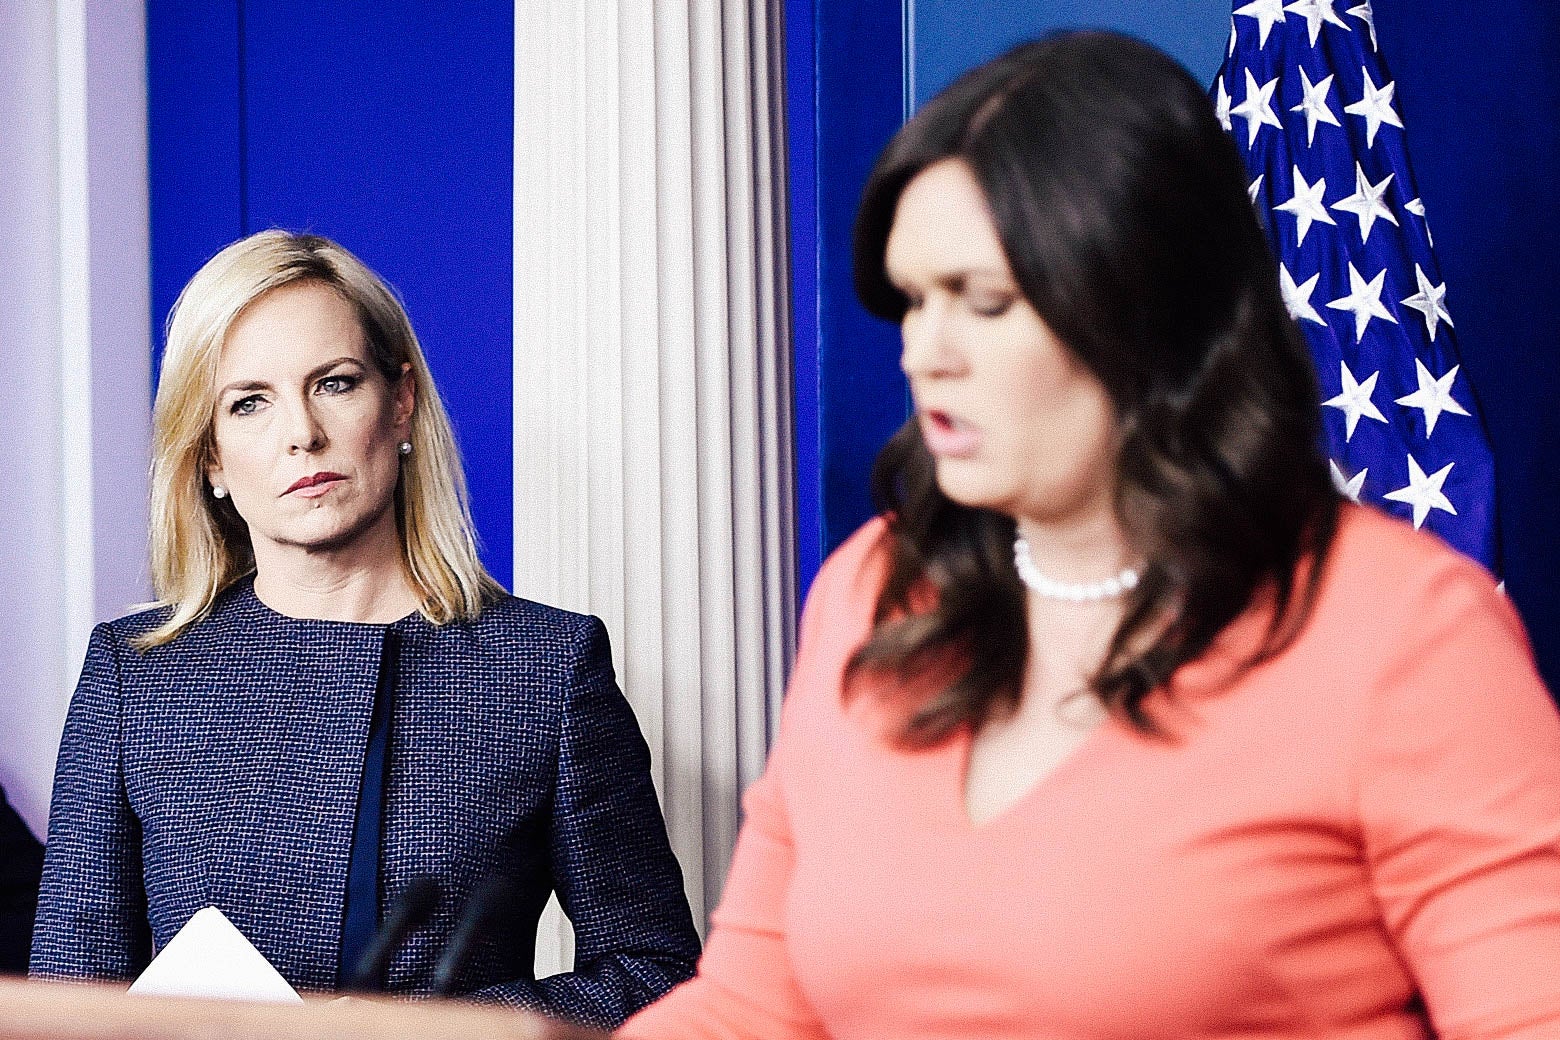 Secretary of Homeland Security Kirstjen Nielsen looks on as White House spokesperson Sarah Huckabee Sanders speaks during a press briefing at the White House.